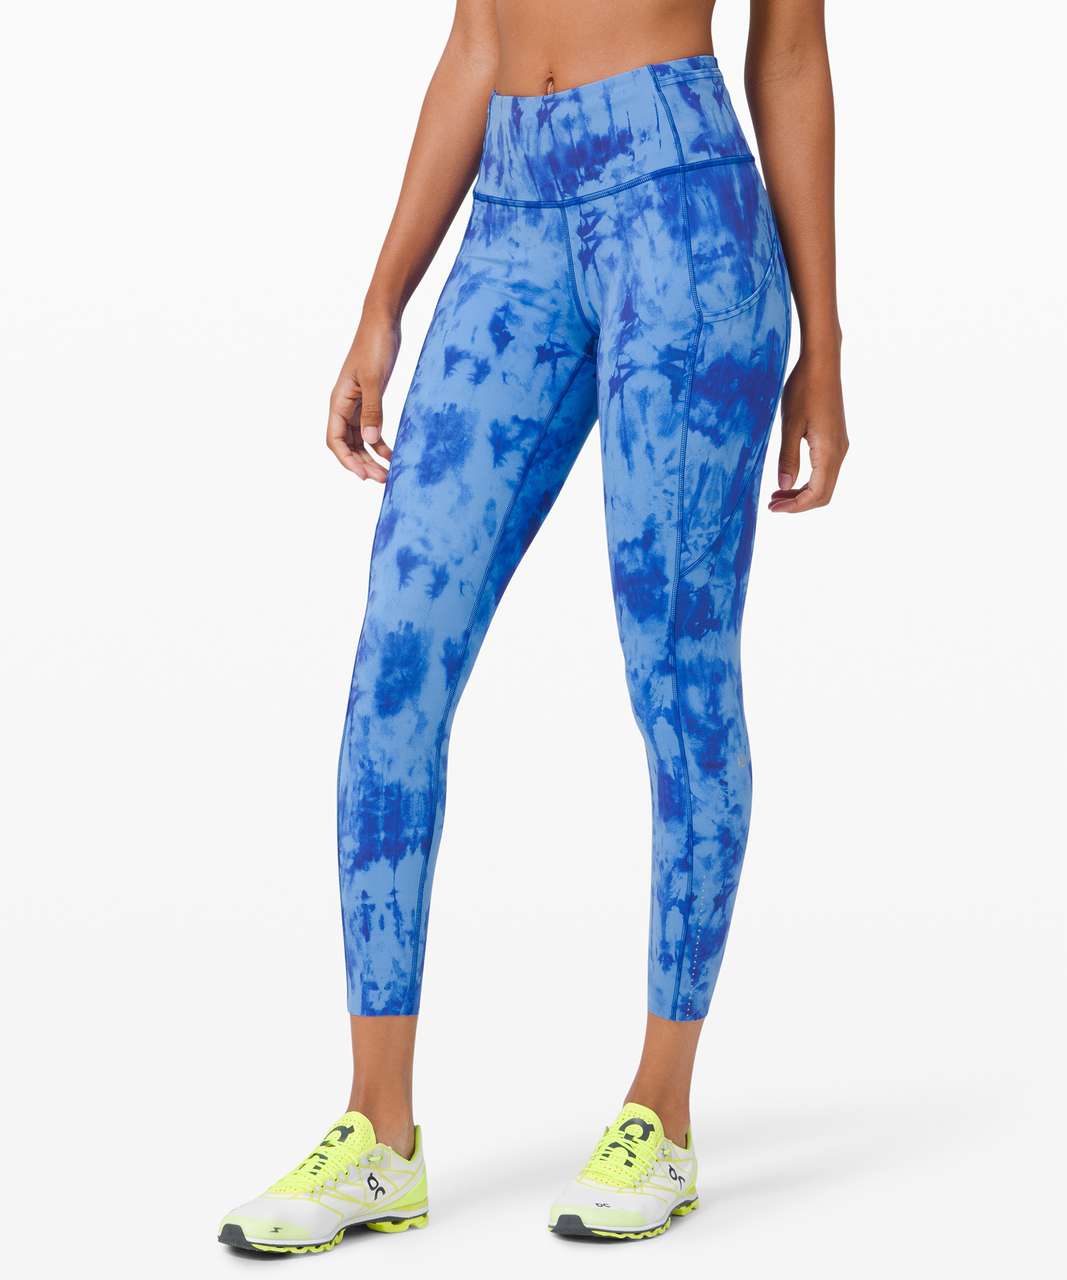 Lululemon Fast And Free 25” Legging Blue Size 2 - $75 (41% Off Retail) -  From Emily